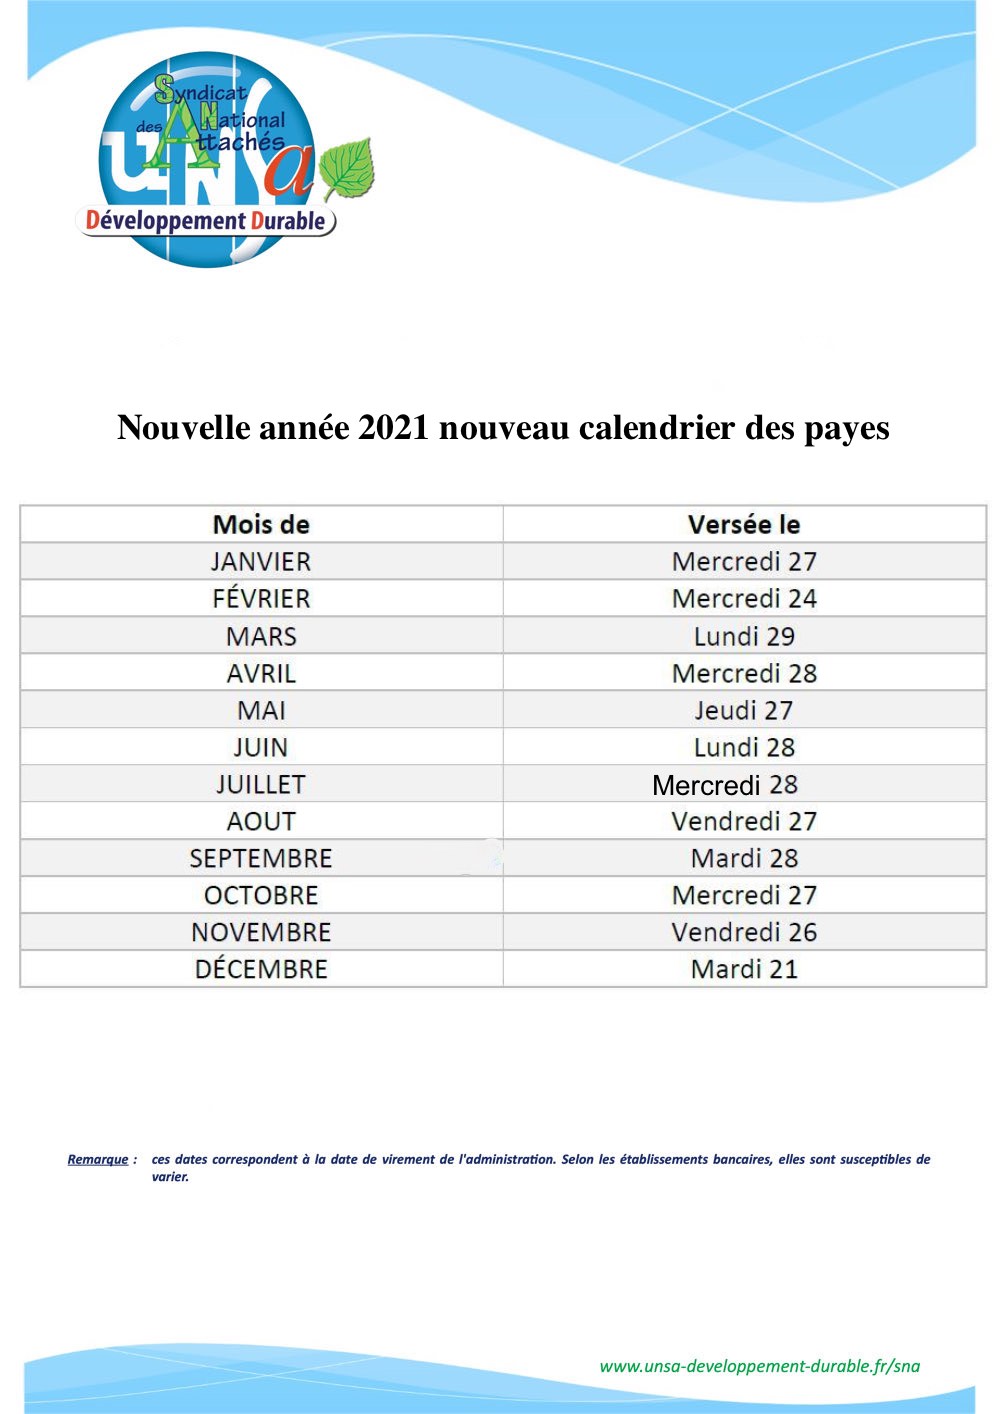 Calendrier des payes 2021